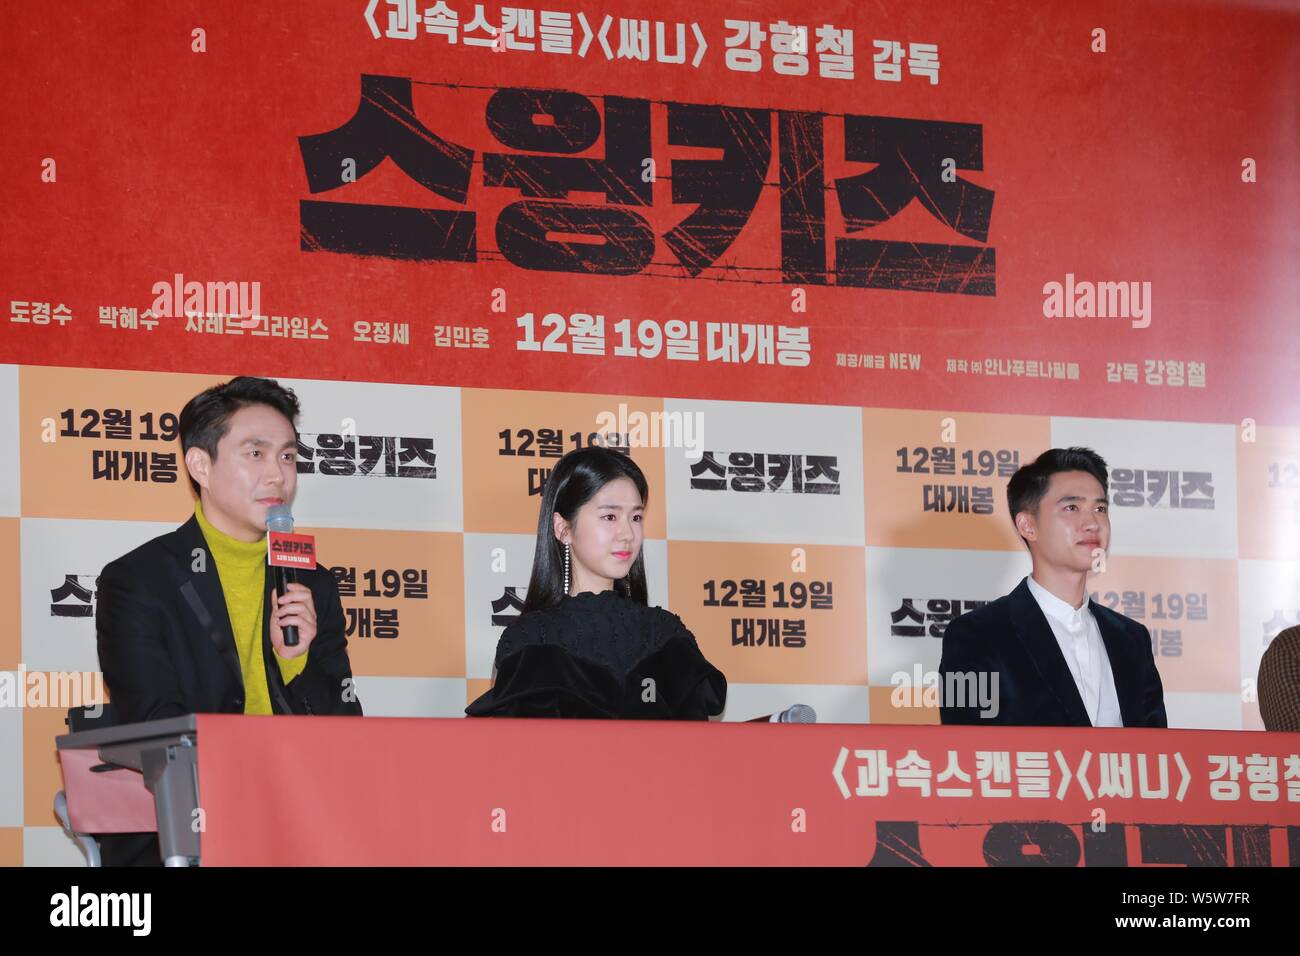 (From left) South Korean actor Oh Jung-se, actress and singer Park Hye-su, and Singer and actor Do Kyung-soo, better known by his stage name D.O., of Stock Photo